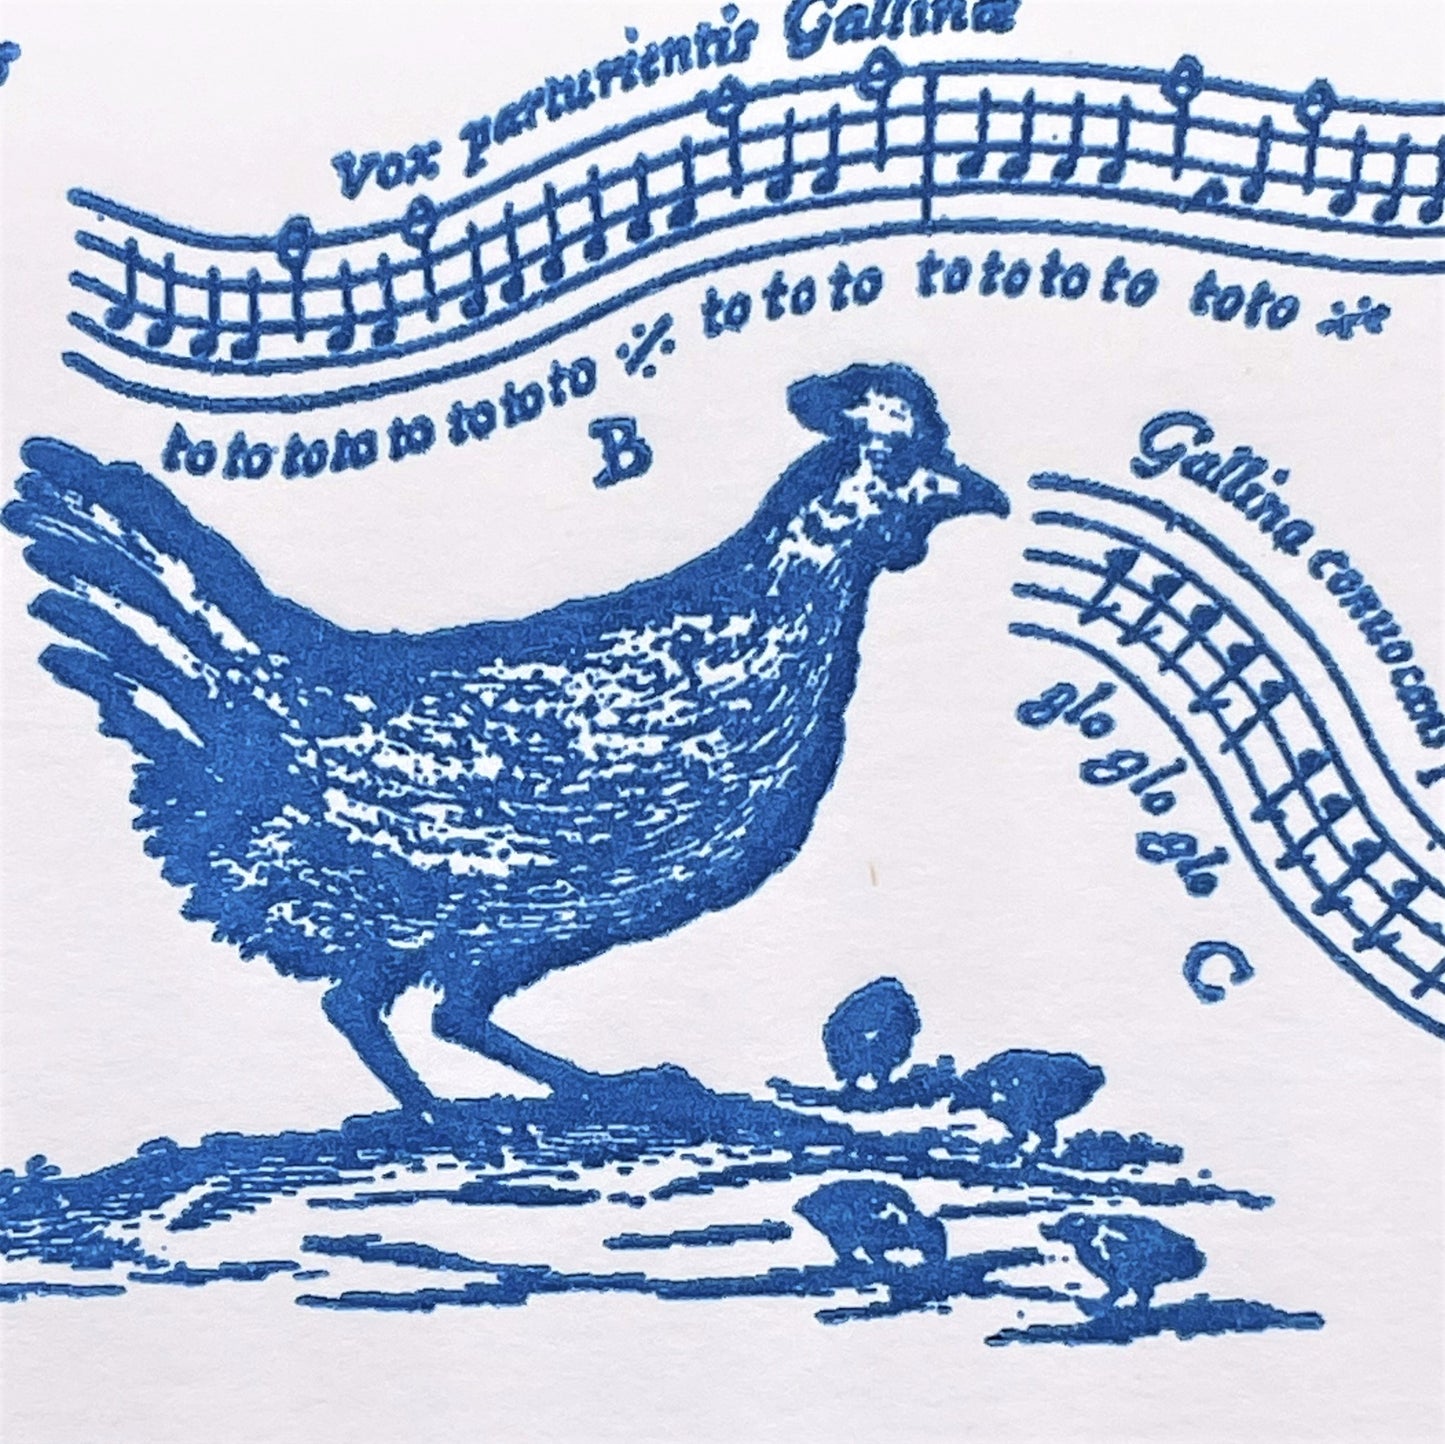 letterpress greetings card of a drawing of different song birds, blue ink on white, close-up